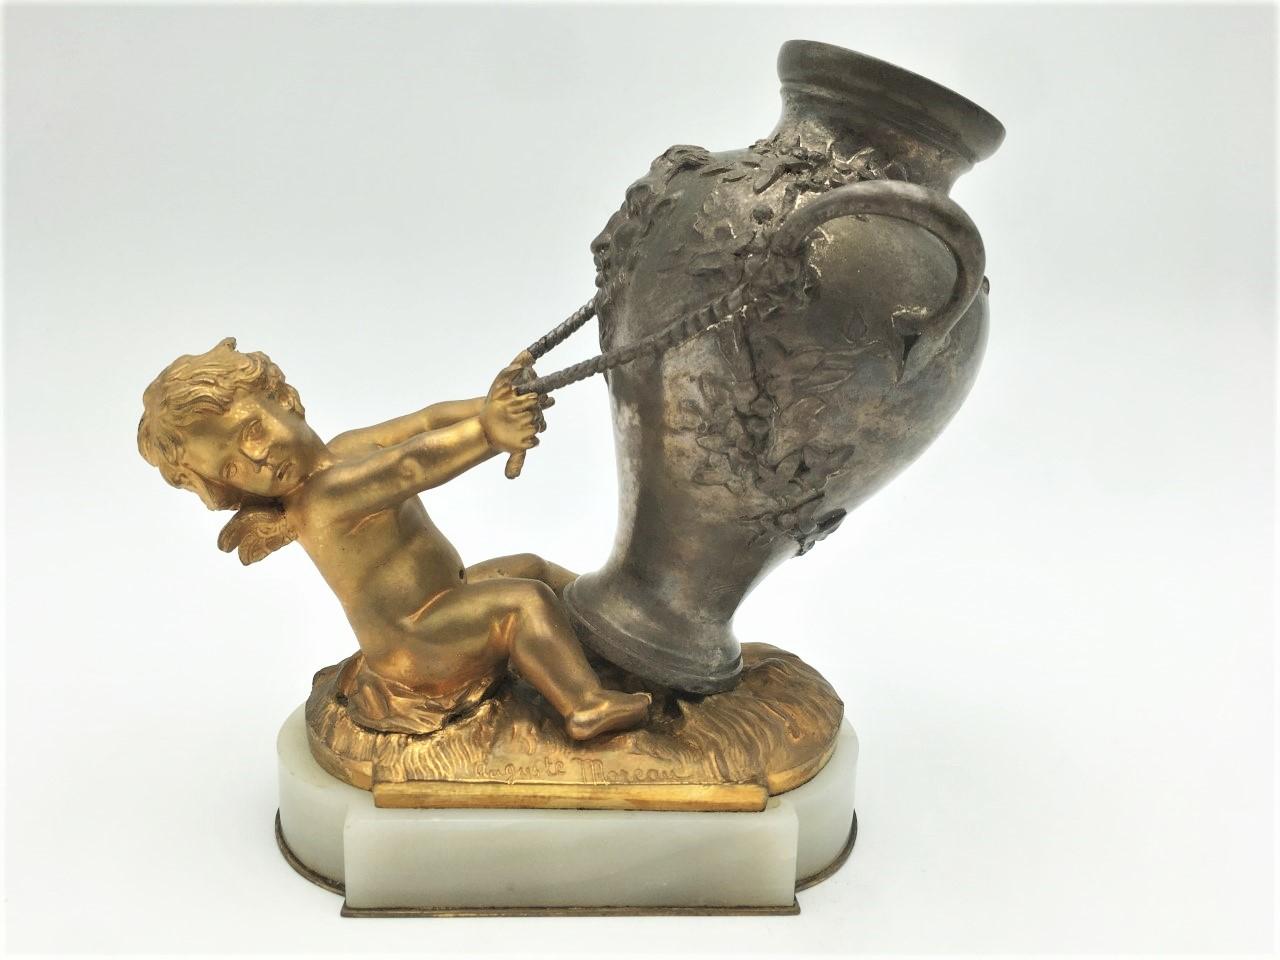 Delightful small bronze signed by Auguste Moreau (1834-1917) in bronze two patina, representing a gilt cherub holding a silver bronze jar decorated with floral motifs and the head of a faun. White marble terrace. France
Napoleon 3 period 19th